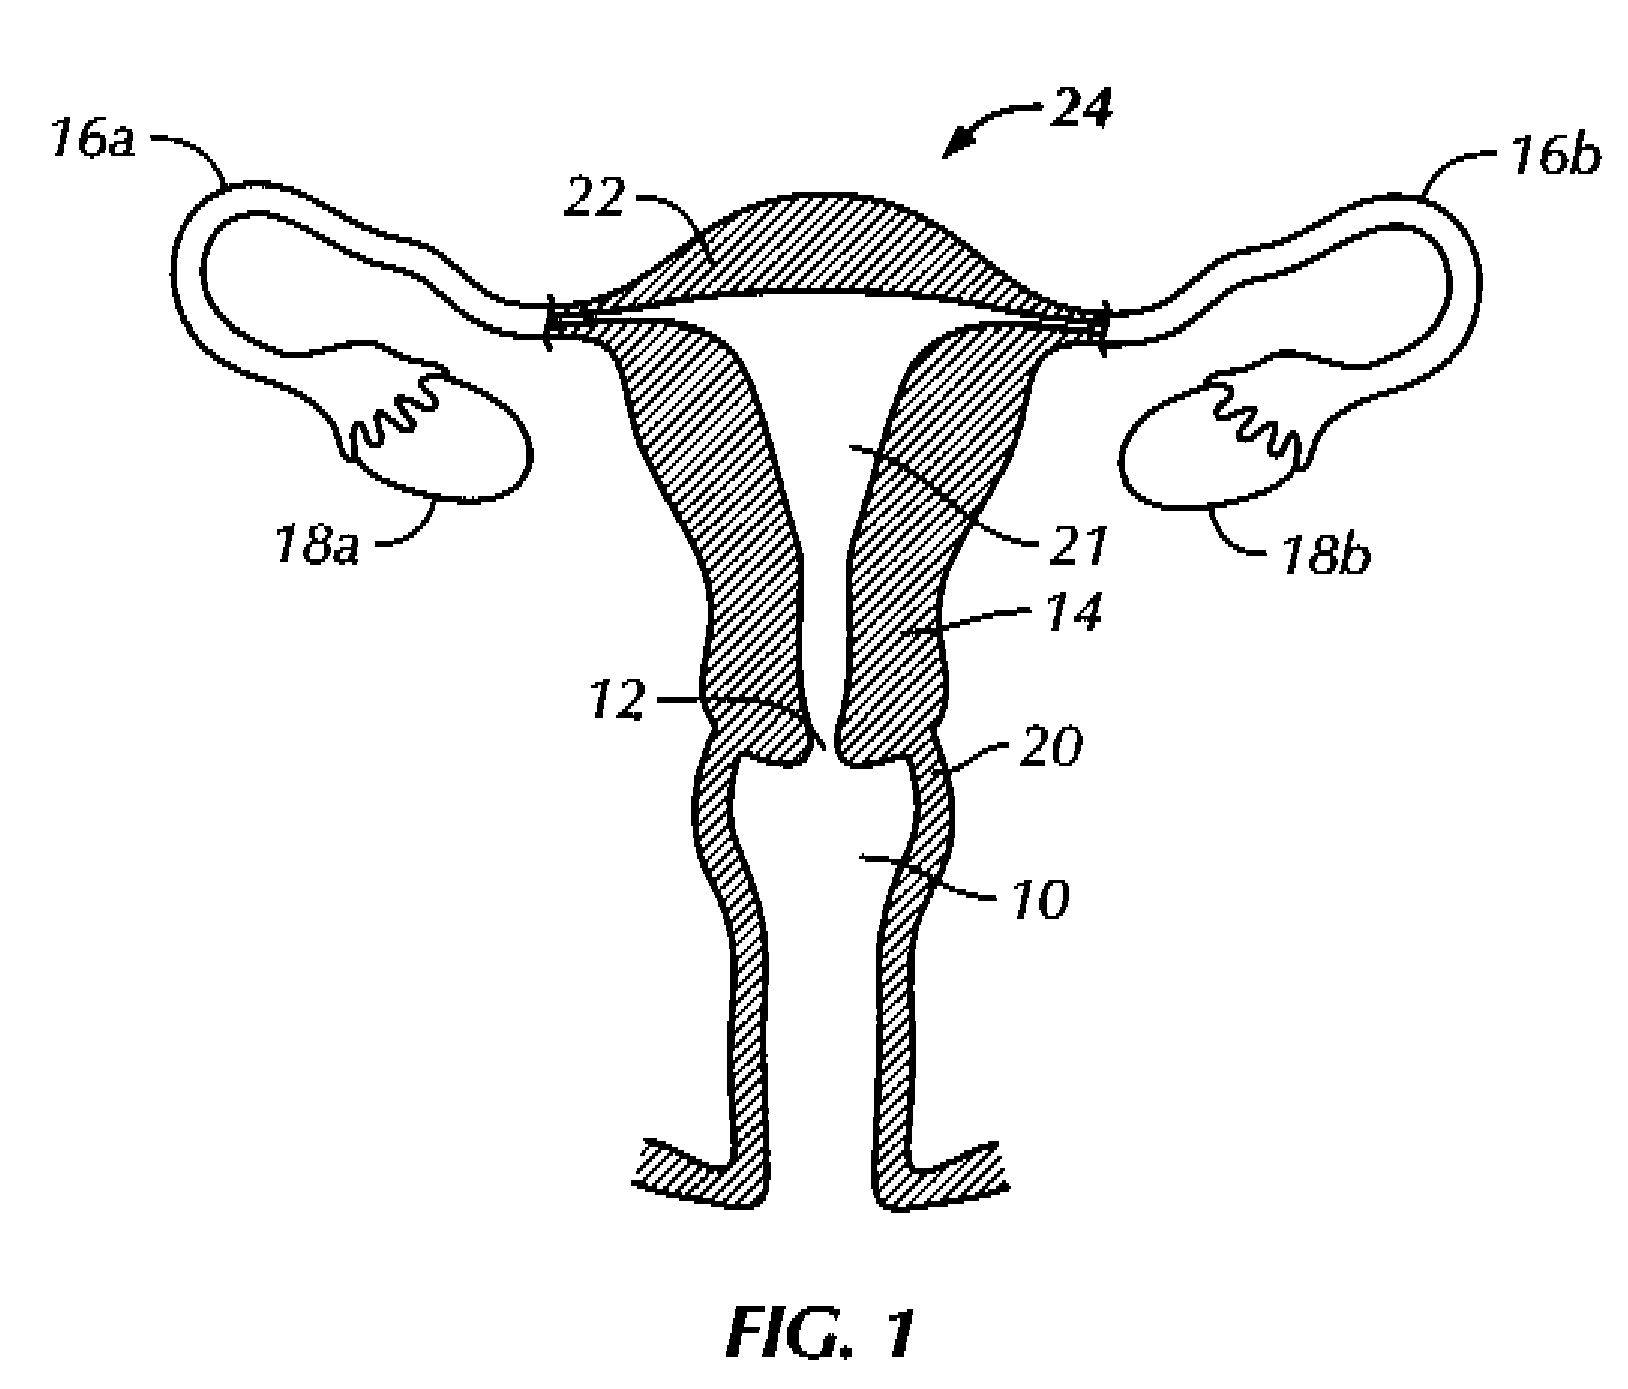 Methods and apparatus for natural orifice vaginal hysterectomy